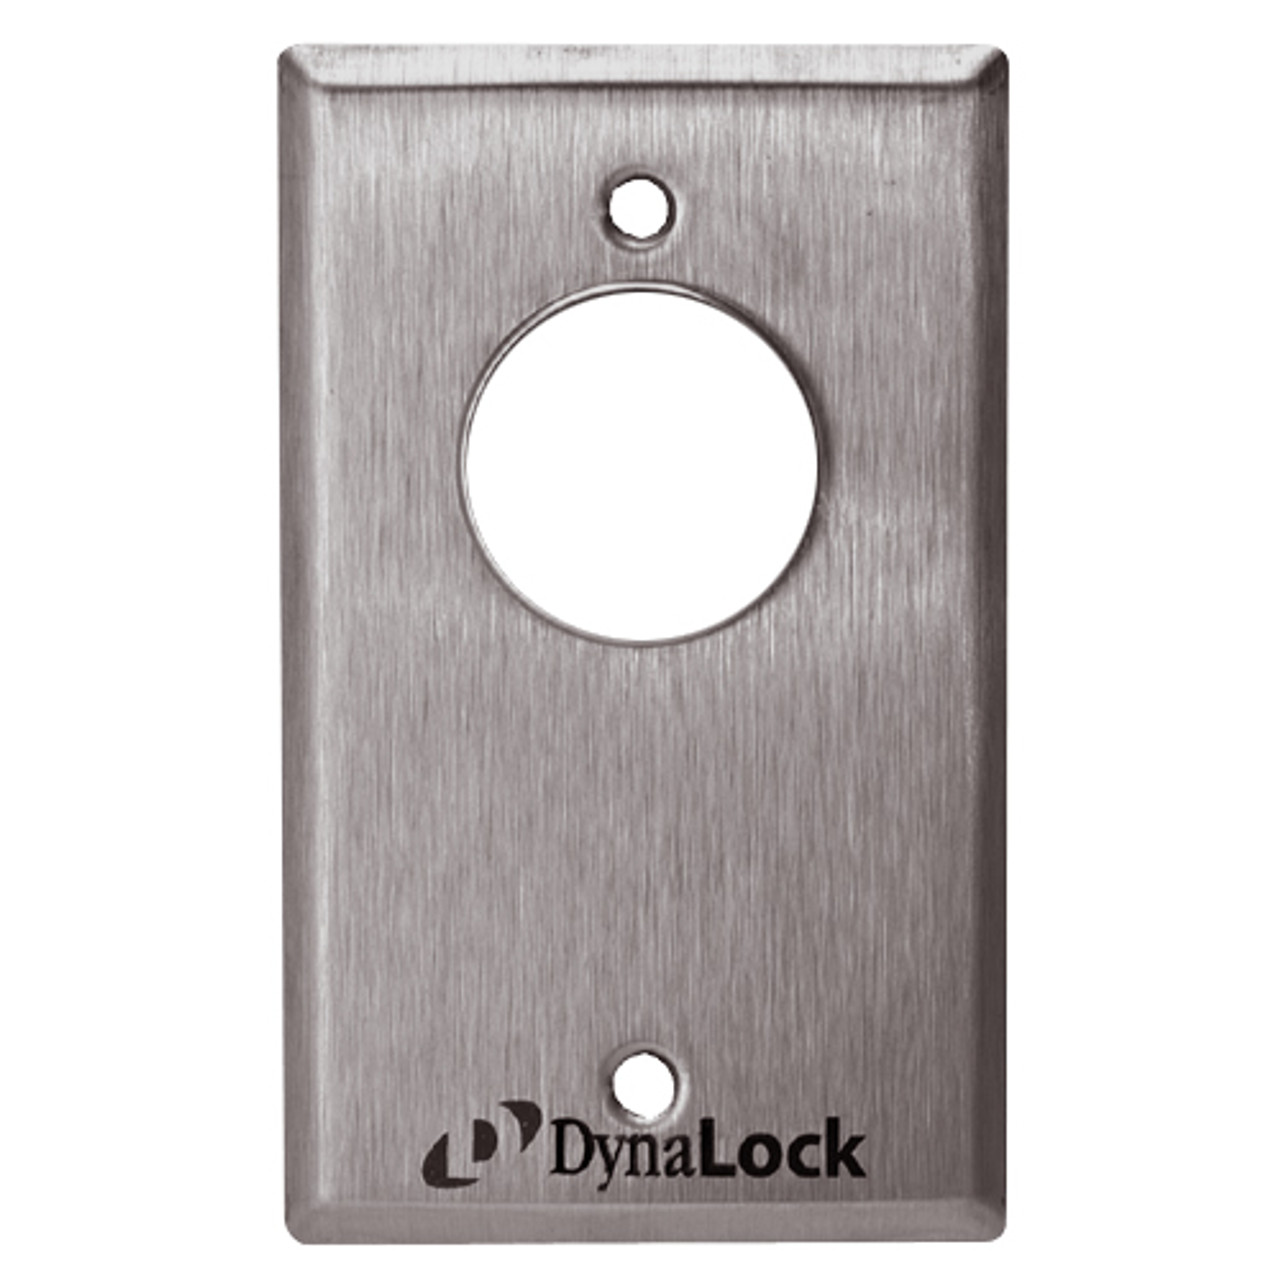 7004-US32D-ATS DynaLock 7000 Series Keyswitches Momentary 2 Single Pole Double Throw with Anti-Tamper Switch in Satin Stainless Steel